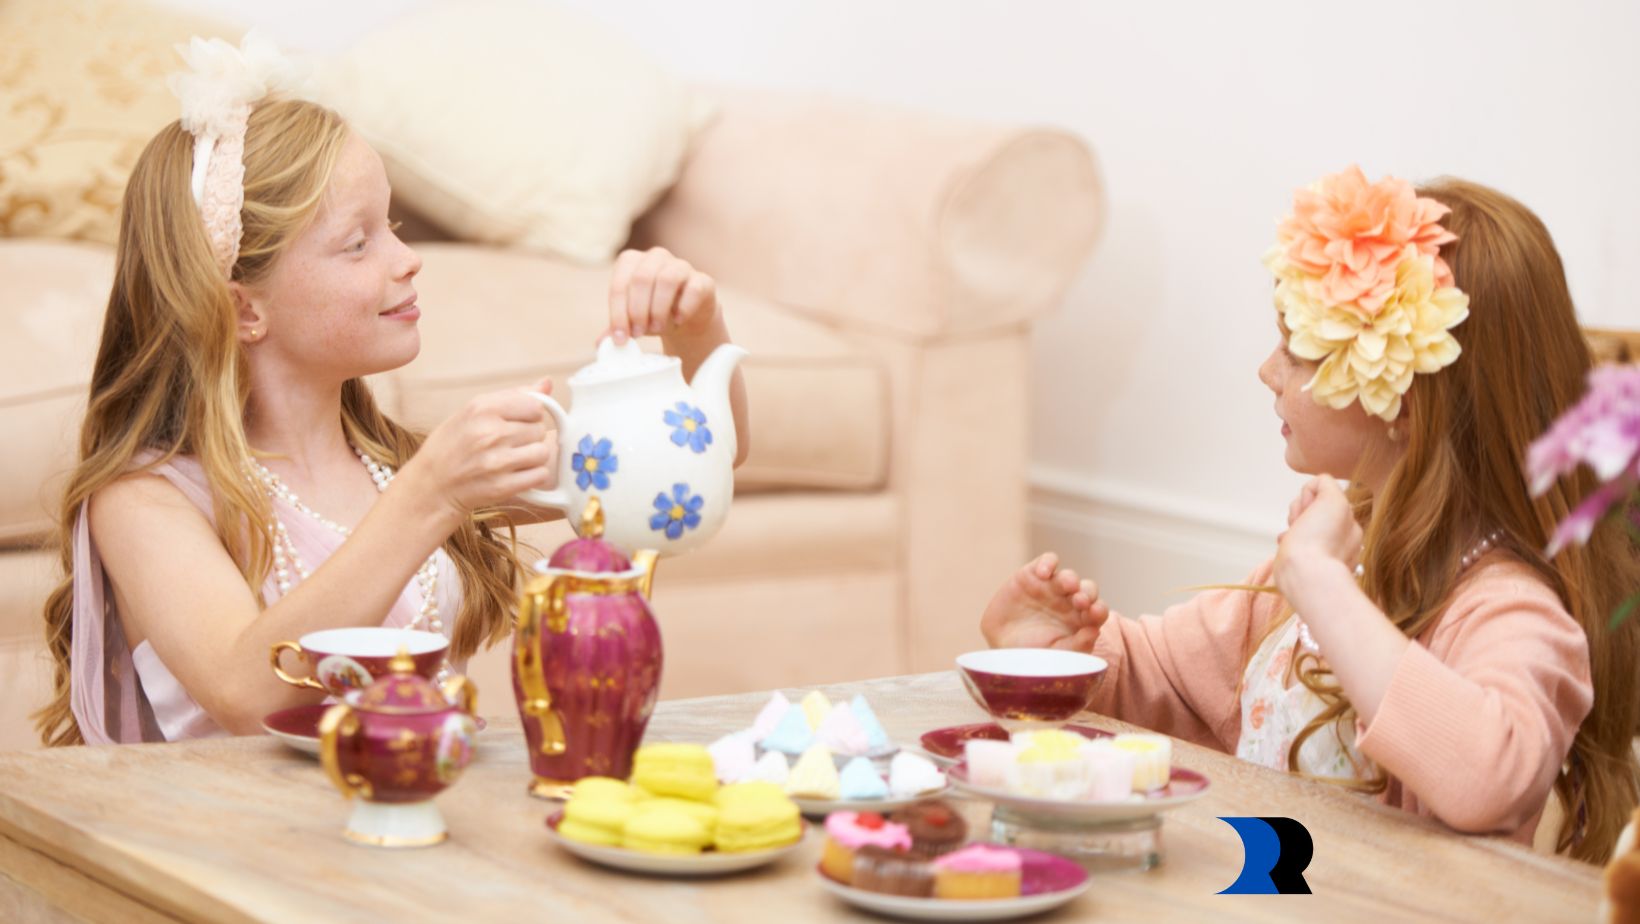 Tea Party Games for Kids